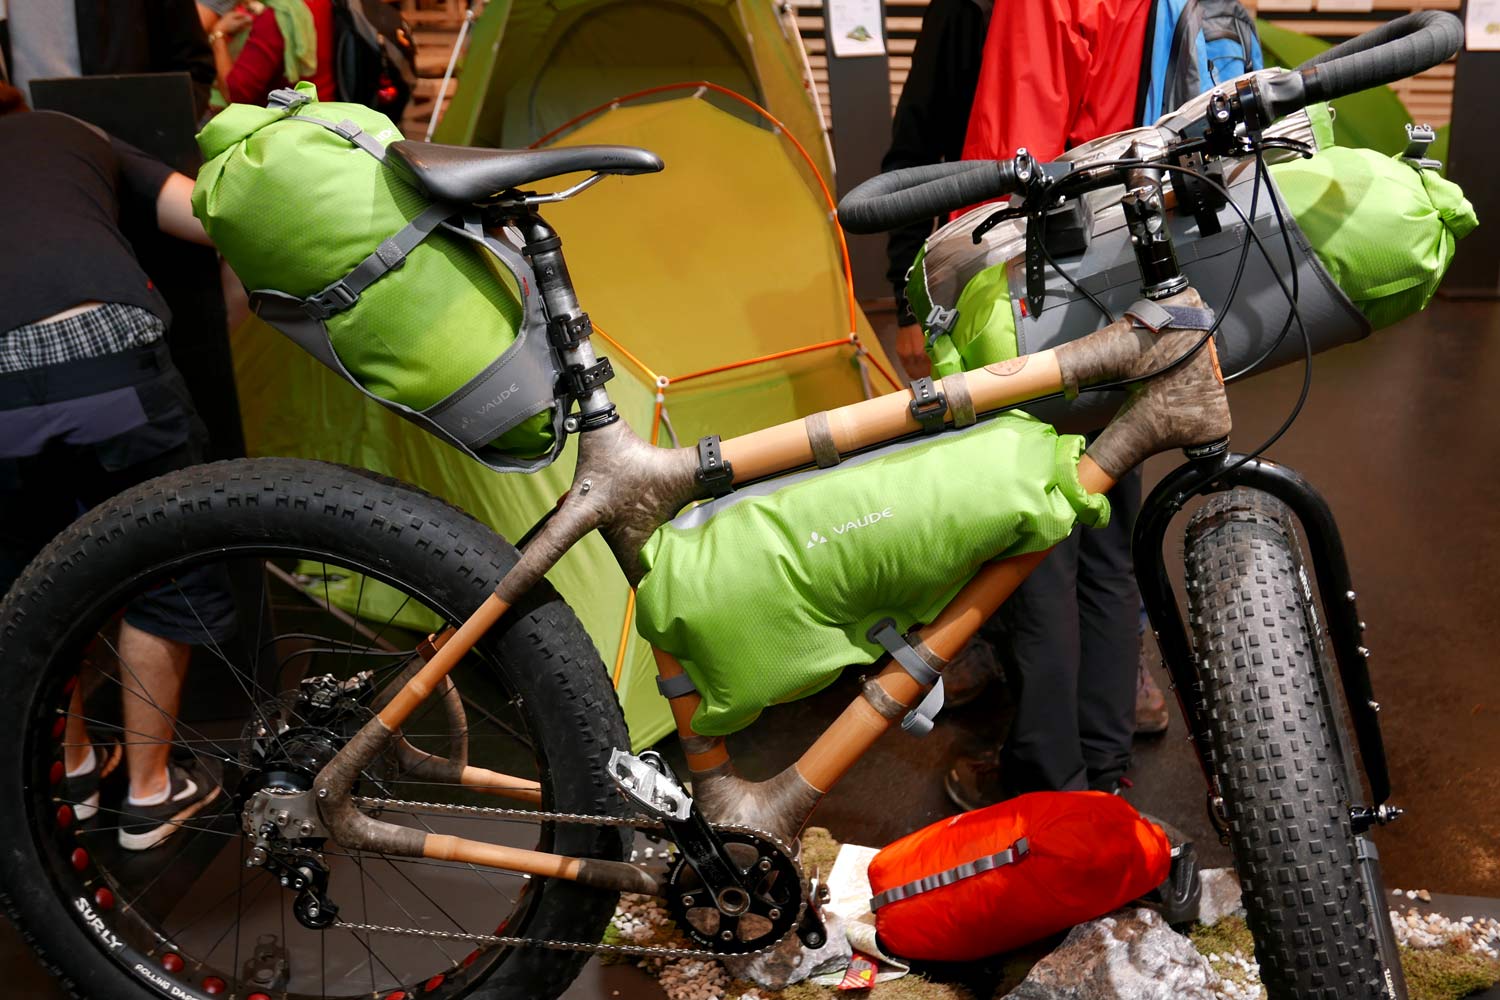 EB17: Vaude packs up for adventure with bikepacking bags, panniers & enduro packs